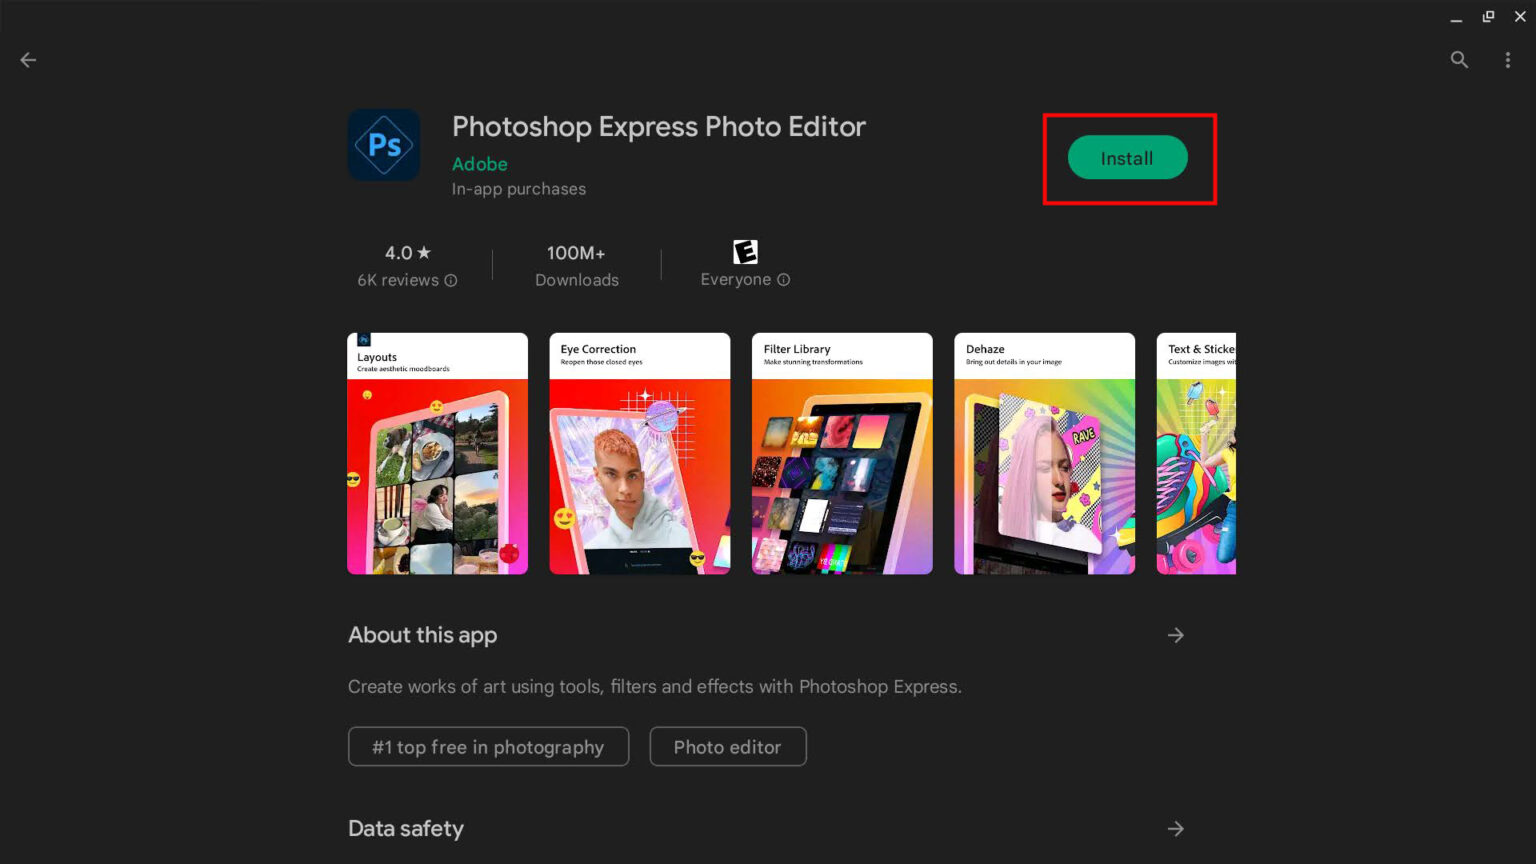 can i download the adobe photoshop app on my chromebook